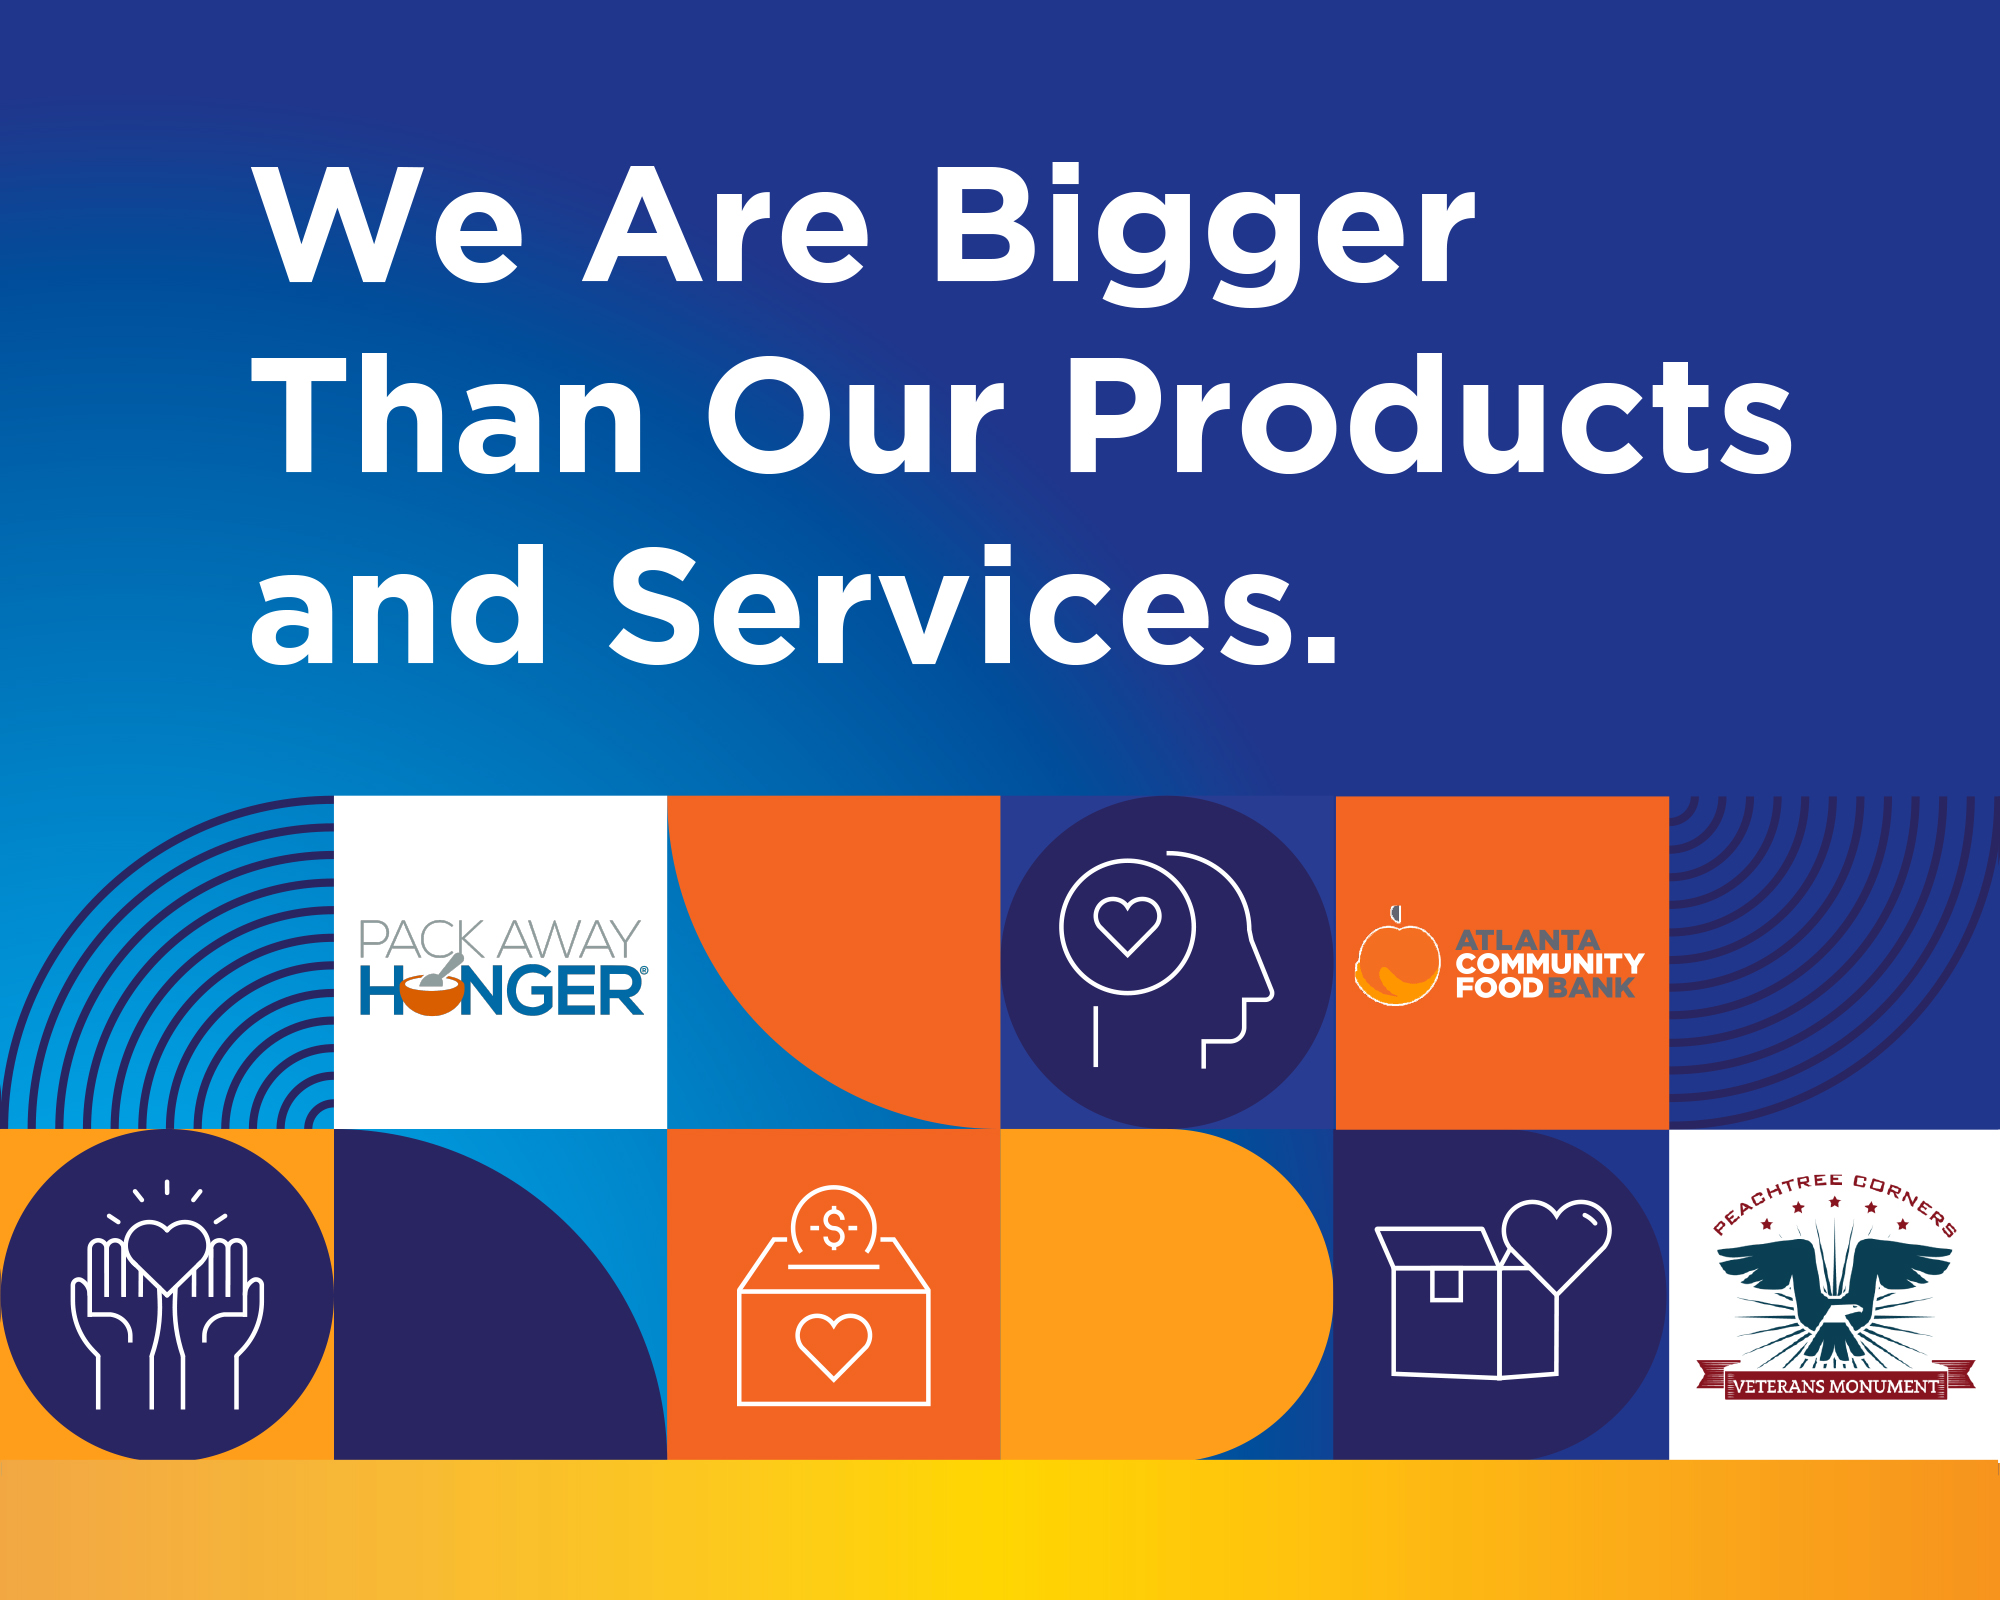 We Are Bigger Than Our Products and Services.